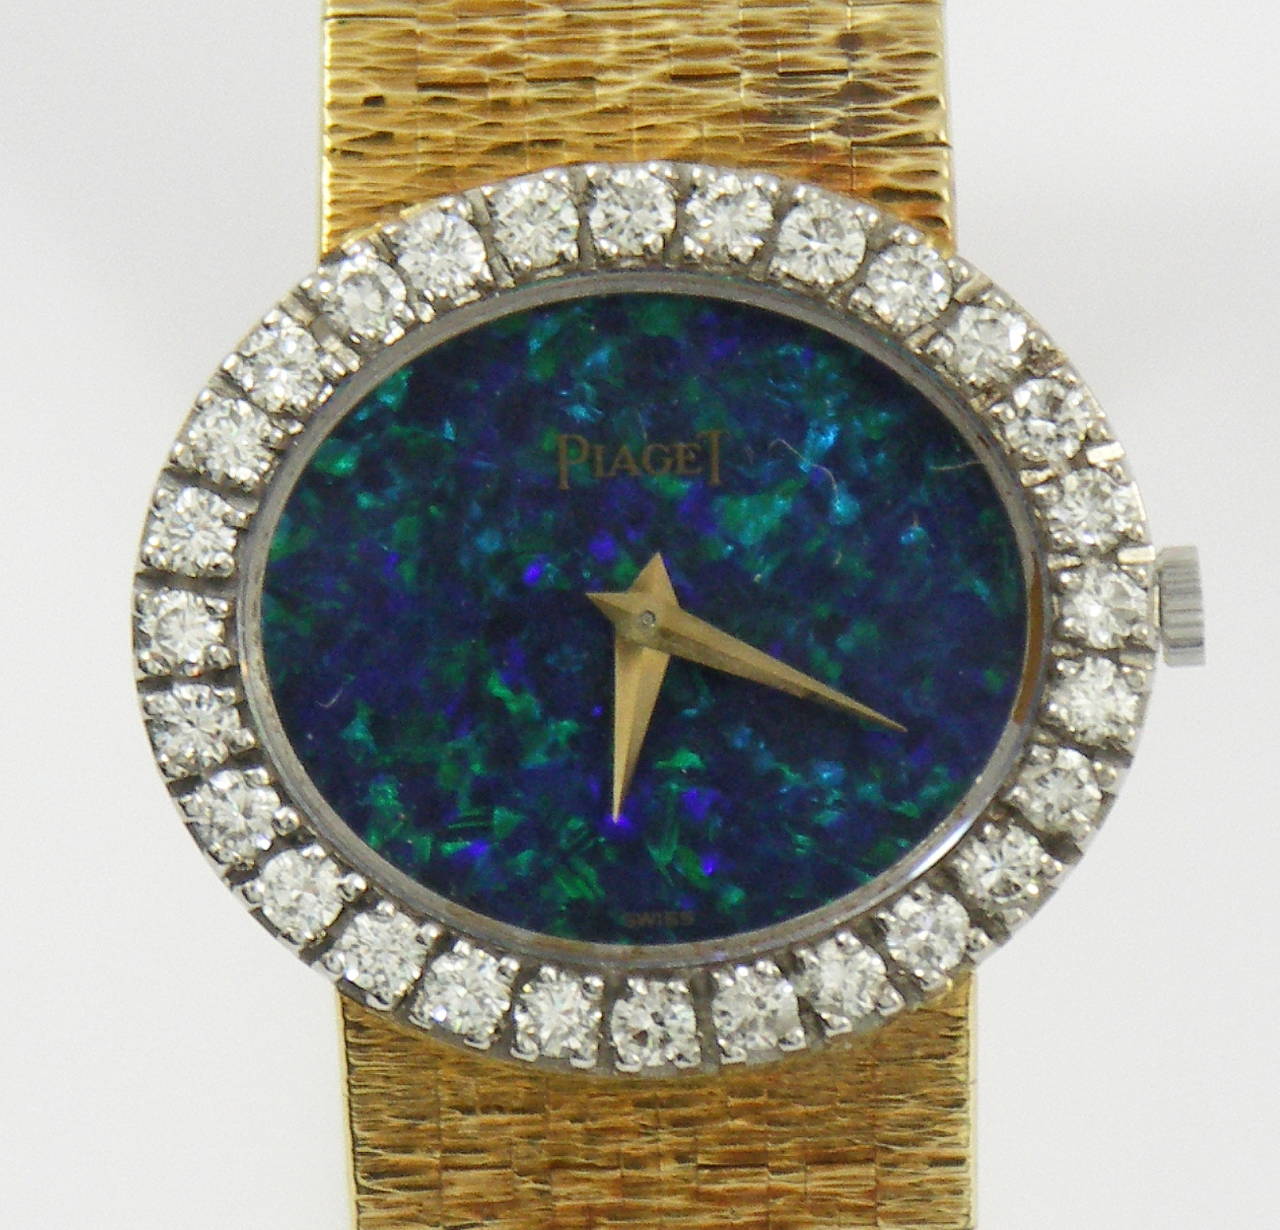 One ladies 18K yellow gold Piaget wrist watch. This elegant timepiece features a black opal dial, rich with green and blue 